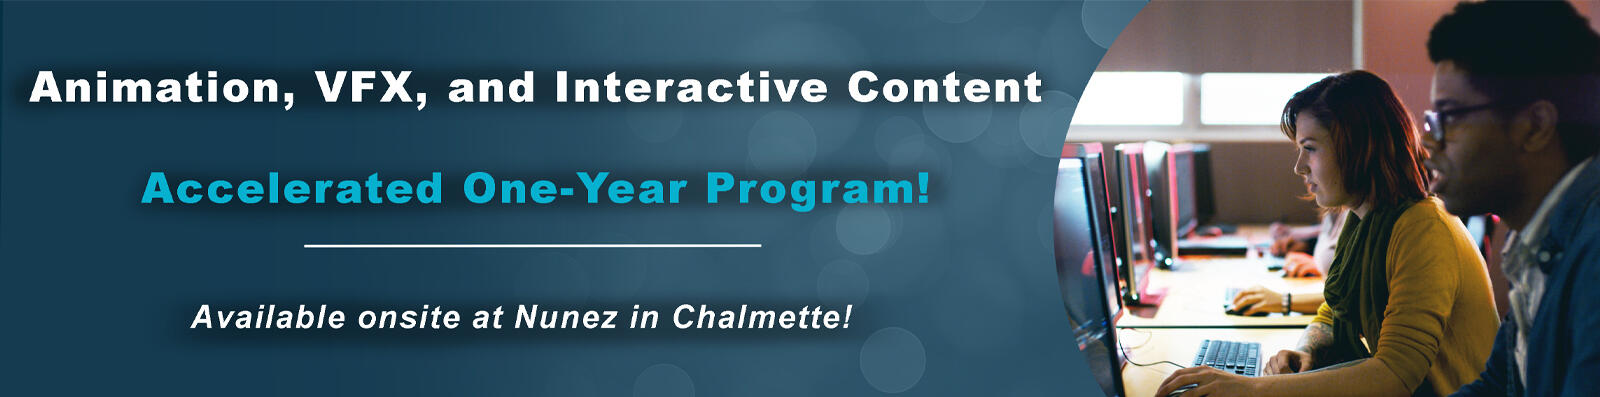 Animation, VFX, and Interactive Content - One-Year Program - Available onsite at Nunez